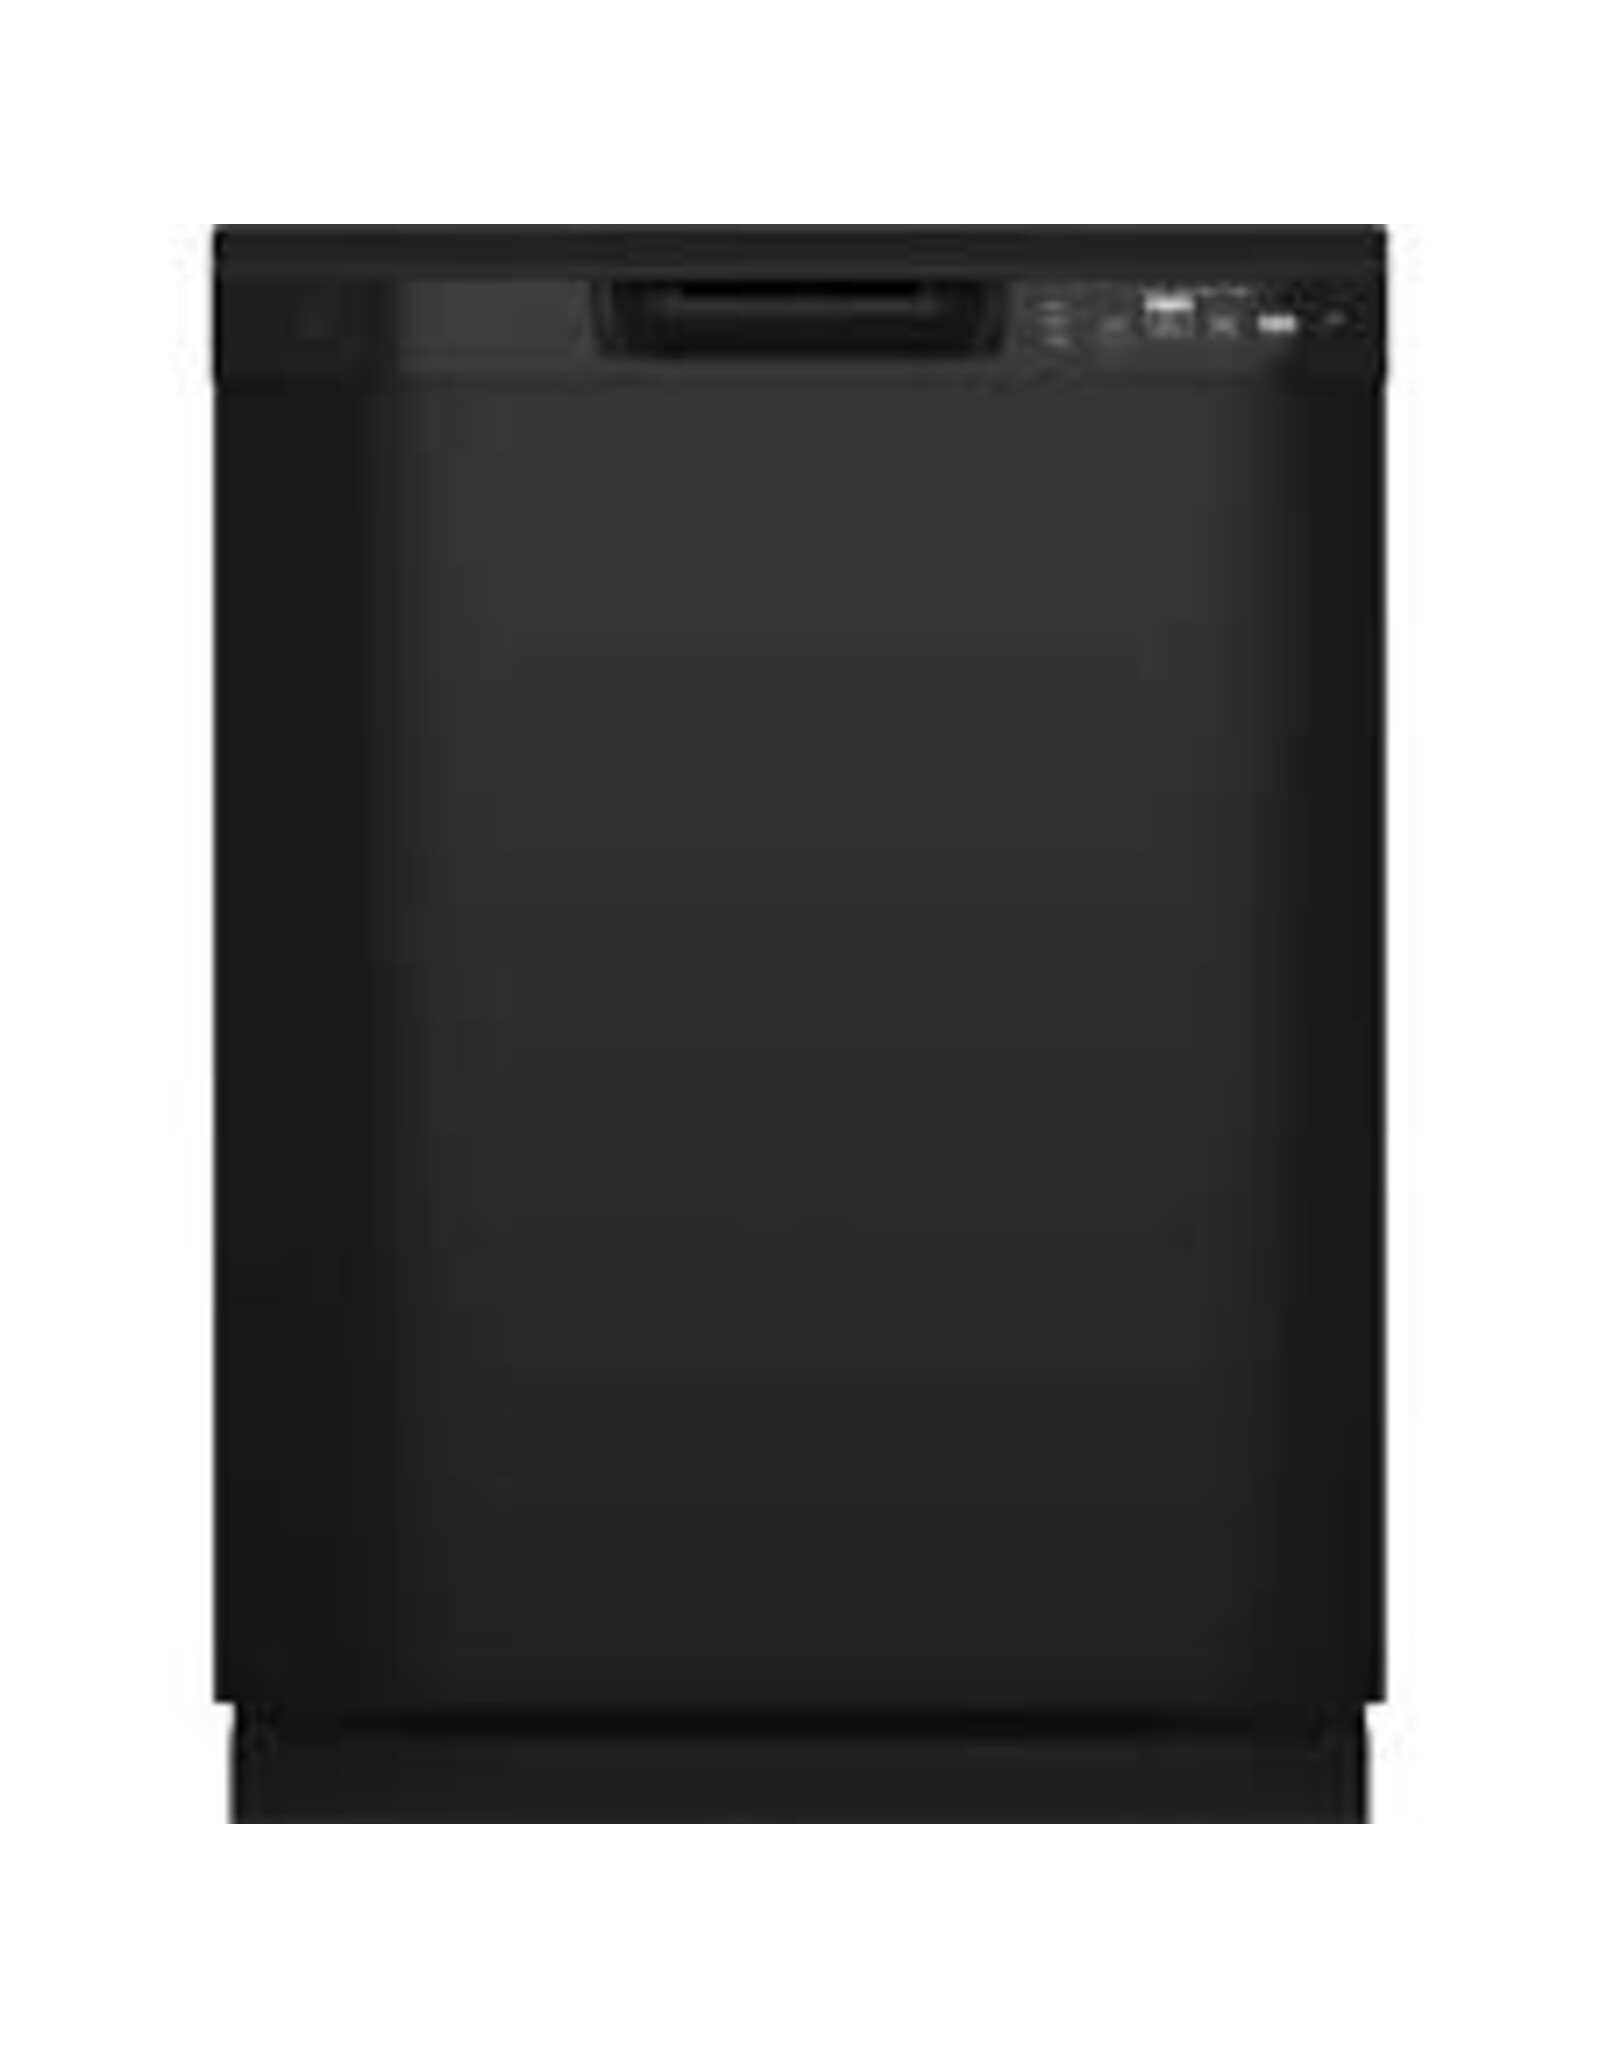 G.E GDF510PGRBB 24 in. Built-In Tall Tub Front Control Black Dishwasher with Dry Boost, 59 dBA